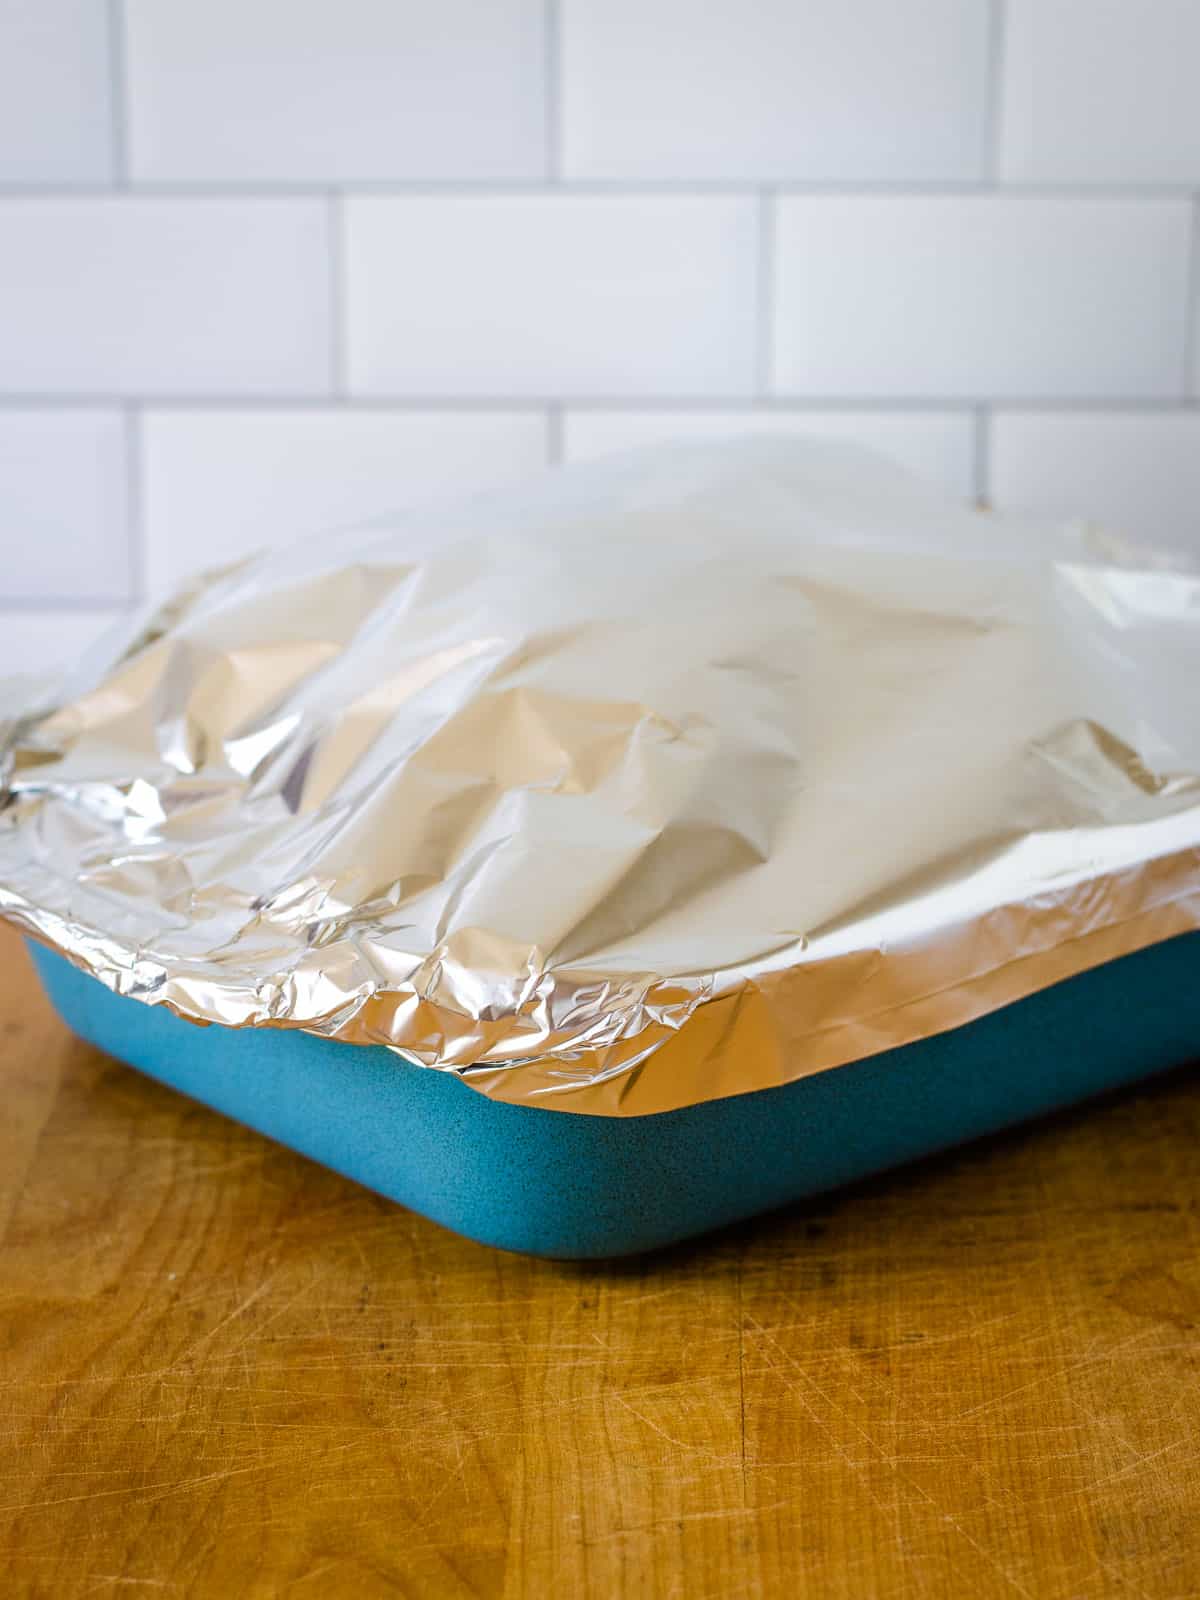 Chicken in baking dish covered in aluminum foil